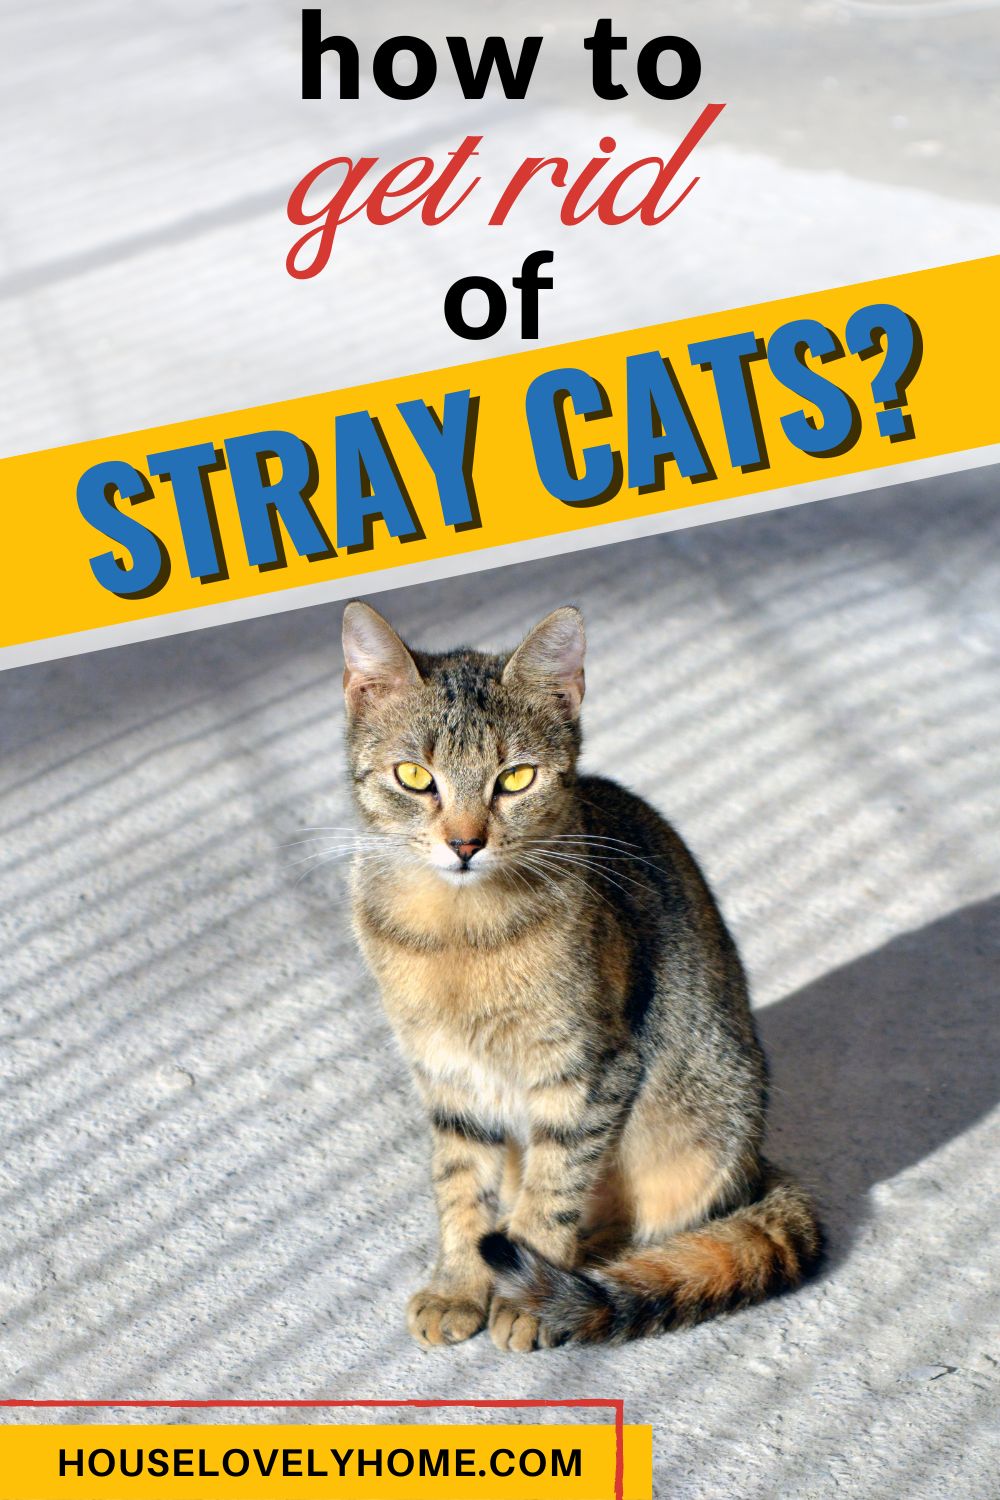 Photo showing a cat sitting on a pavement with a text overlay that reads How to Get Rid of Stray Cats